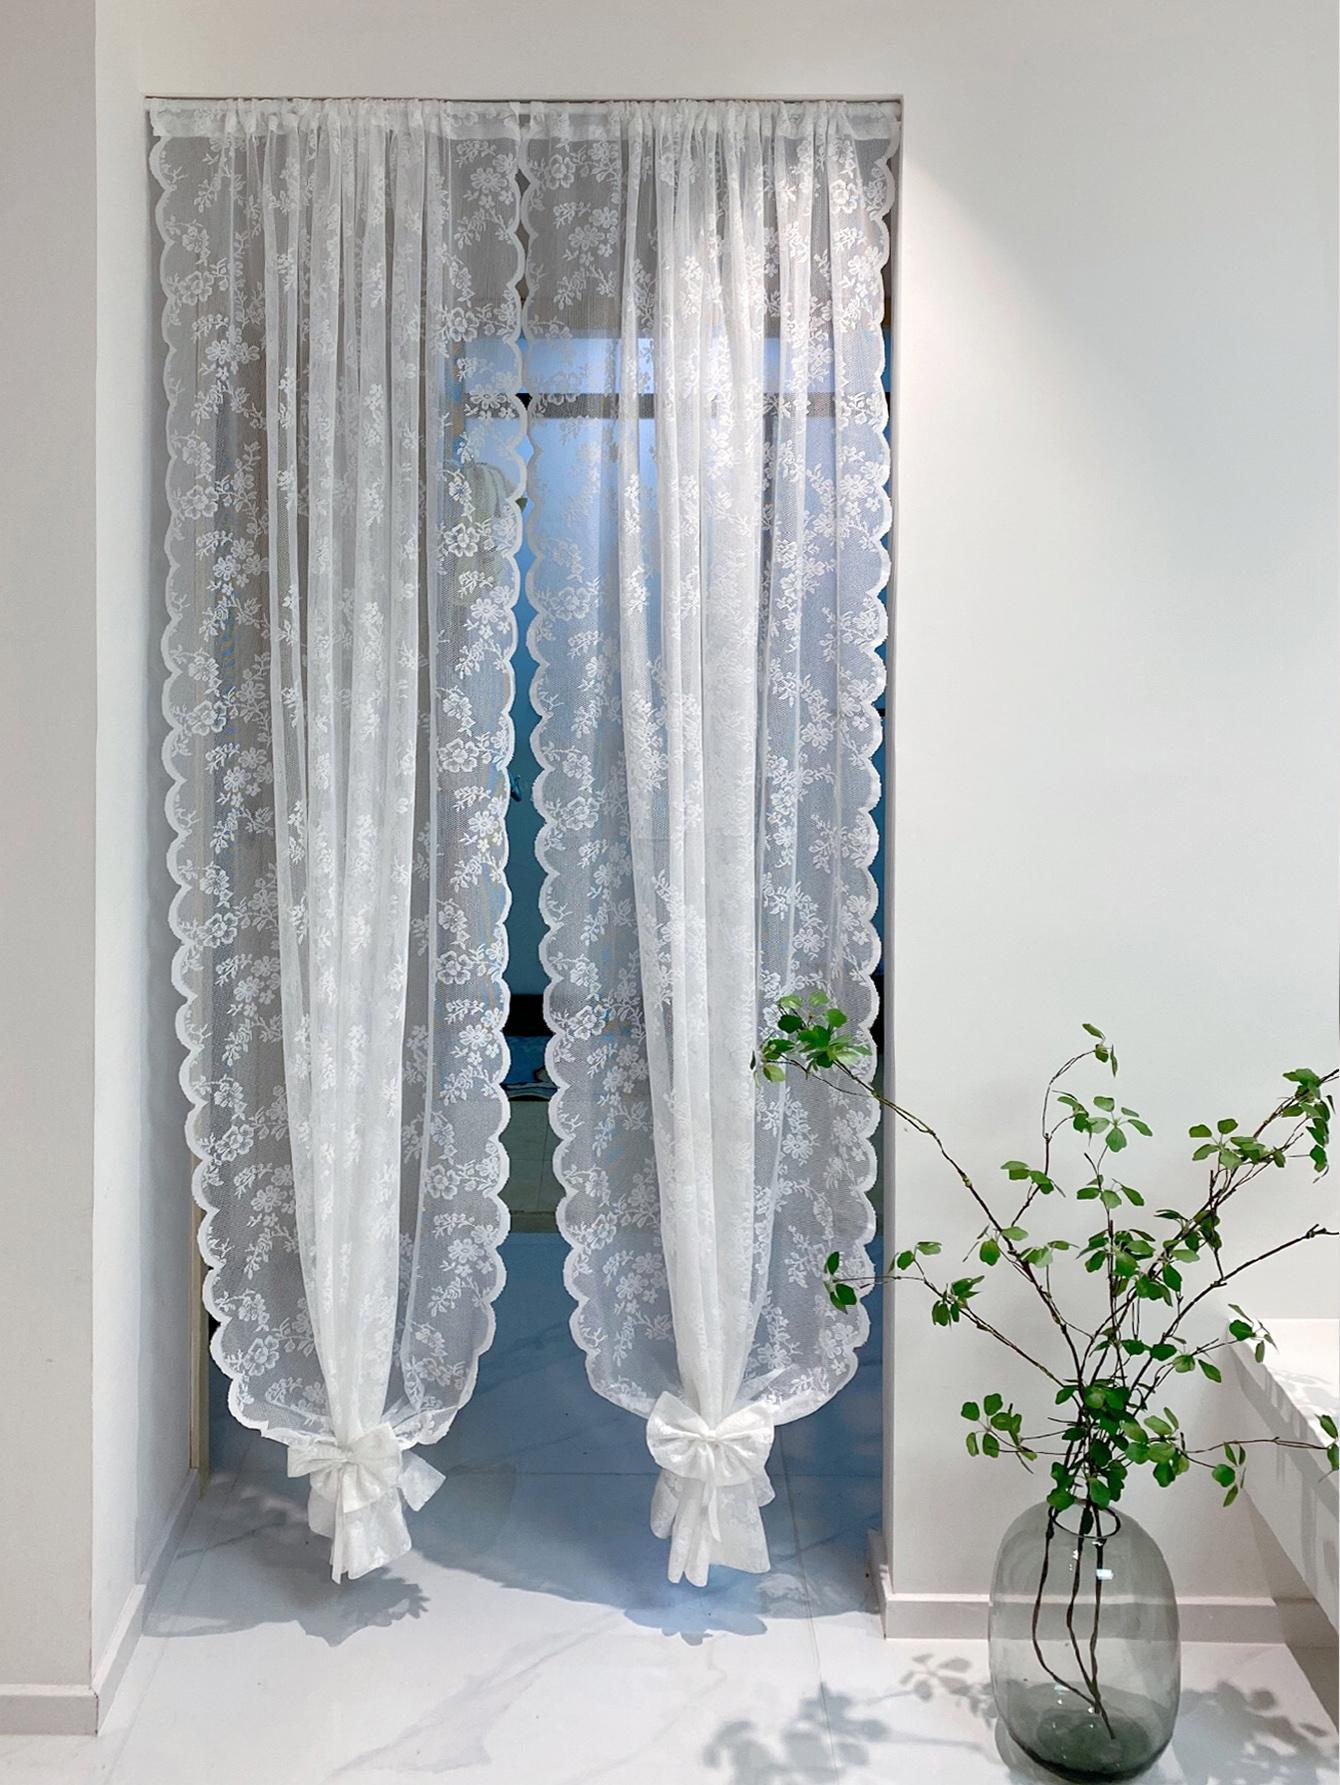 Floral Embroidered Single Panel Sheer Curtain, Simple Lace Design Light Filtering Privacy Sheer Curtain For Living Room And Bedroom